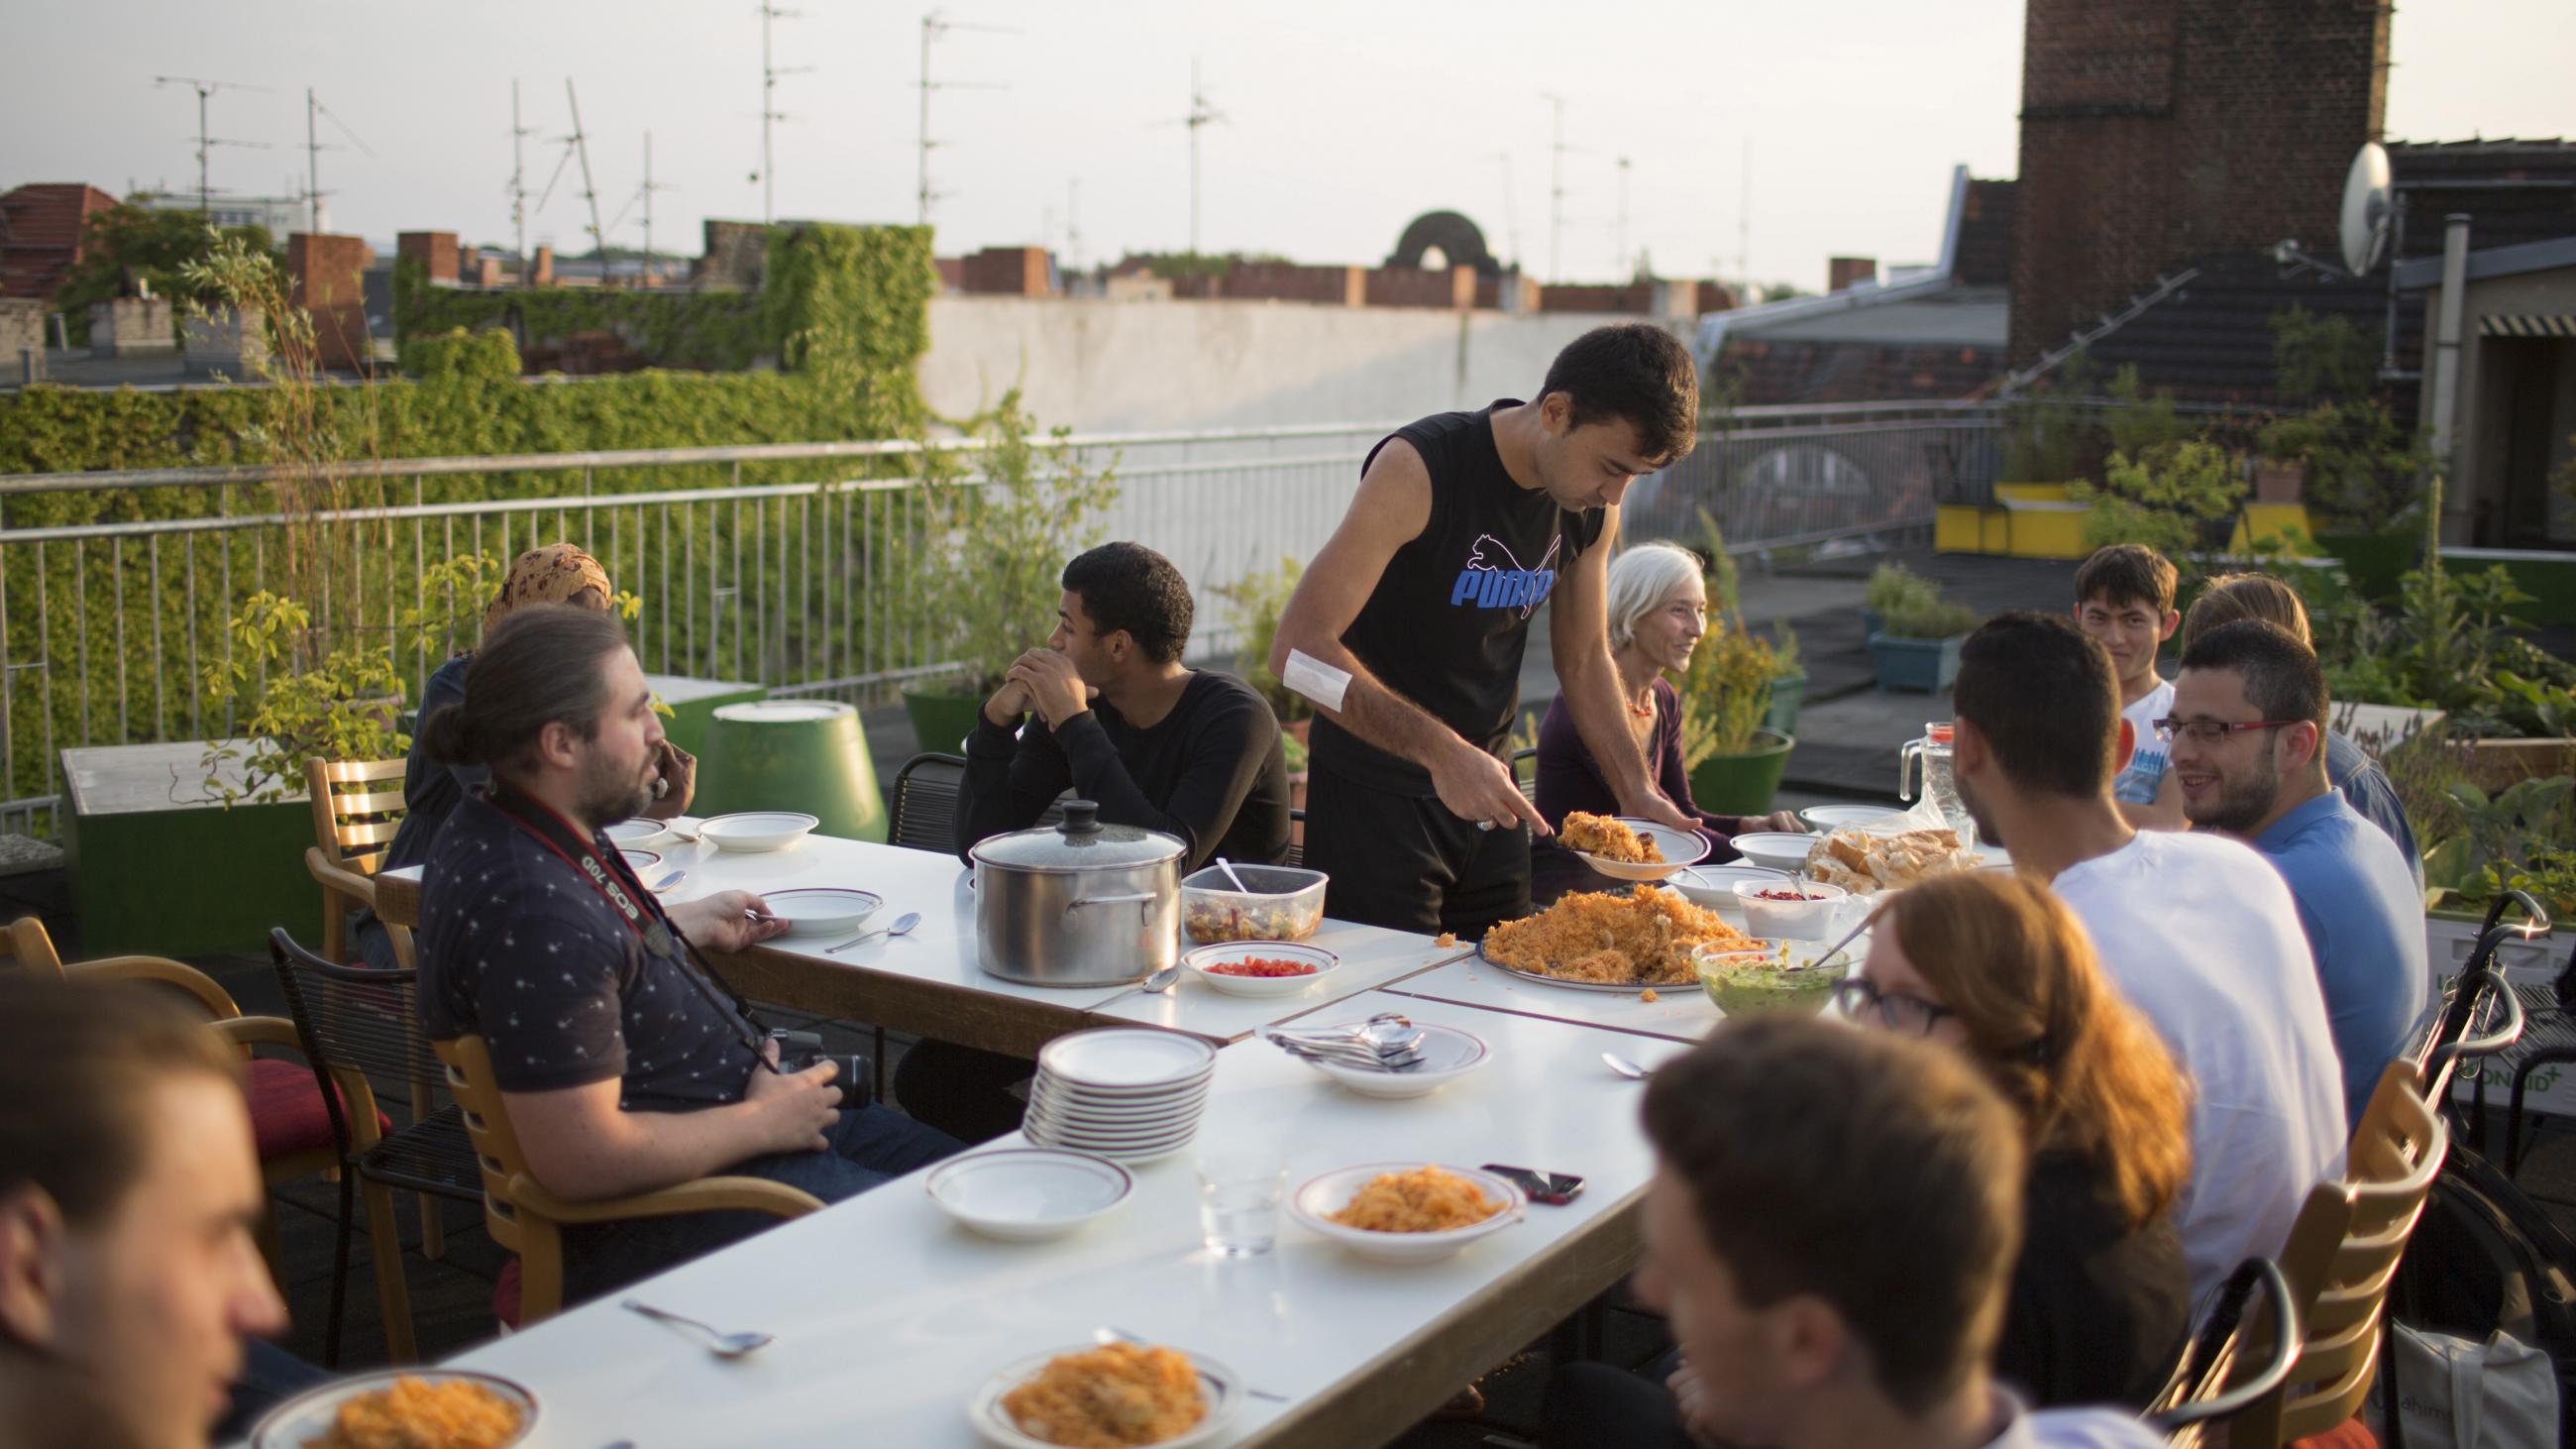 People seeking refuge in a new country live alongside German residents in the "Sharehaus Refugio" community in Berlin, Germany (2015). Neighbors in the five-story, century-old building meet for meals on the rooftop garden.